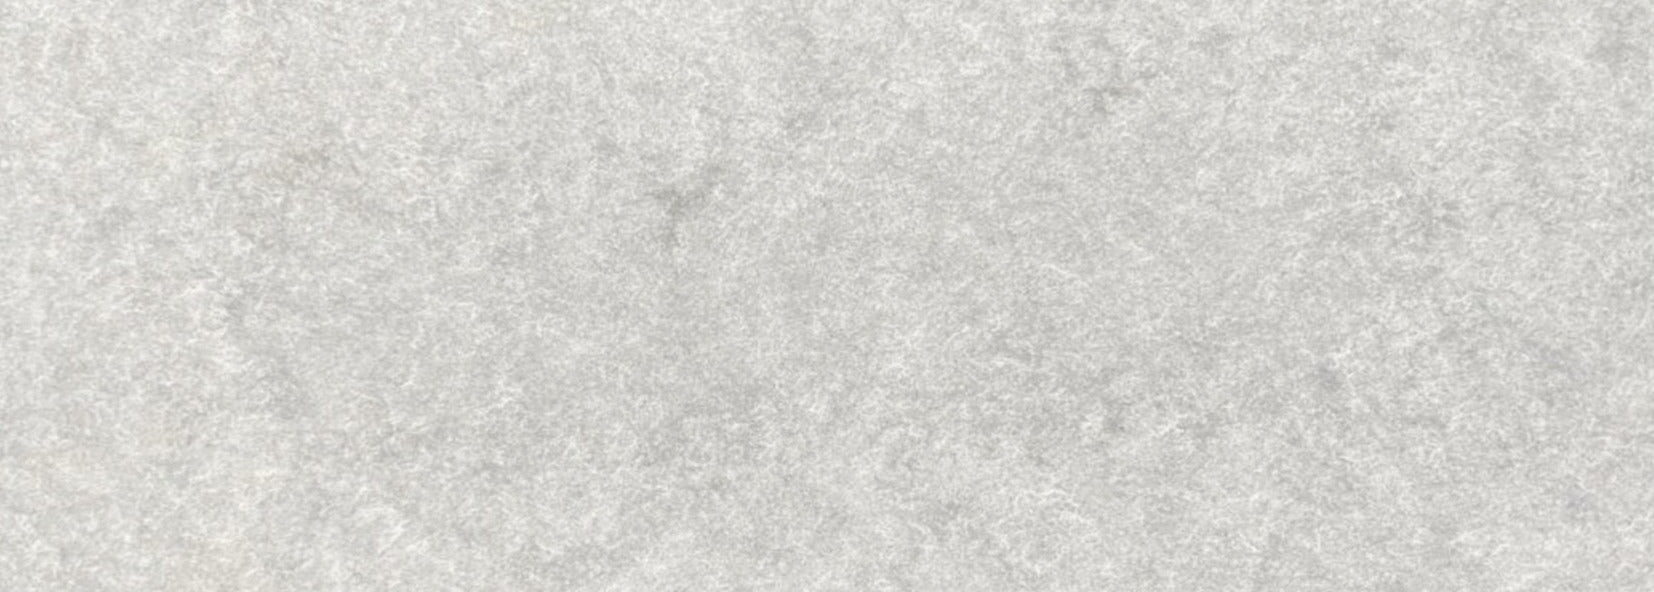 Fiber Cement Board - Space Gray (Polished Surface) | 4 X 8 (32SQFT)